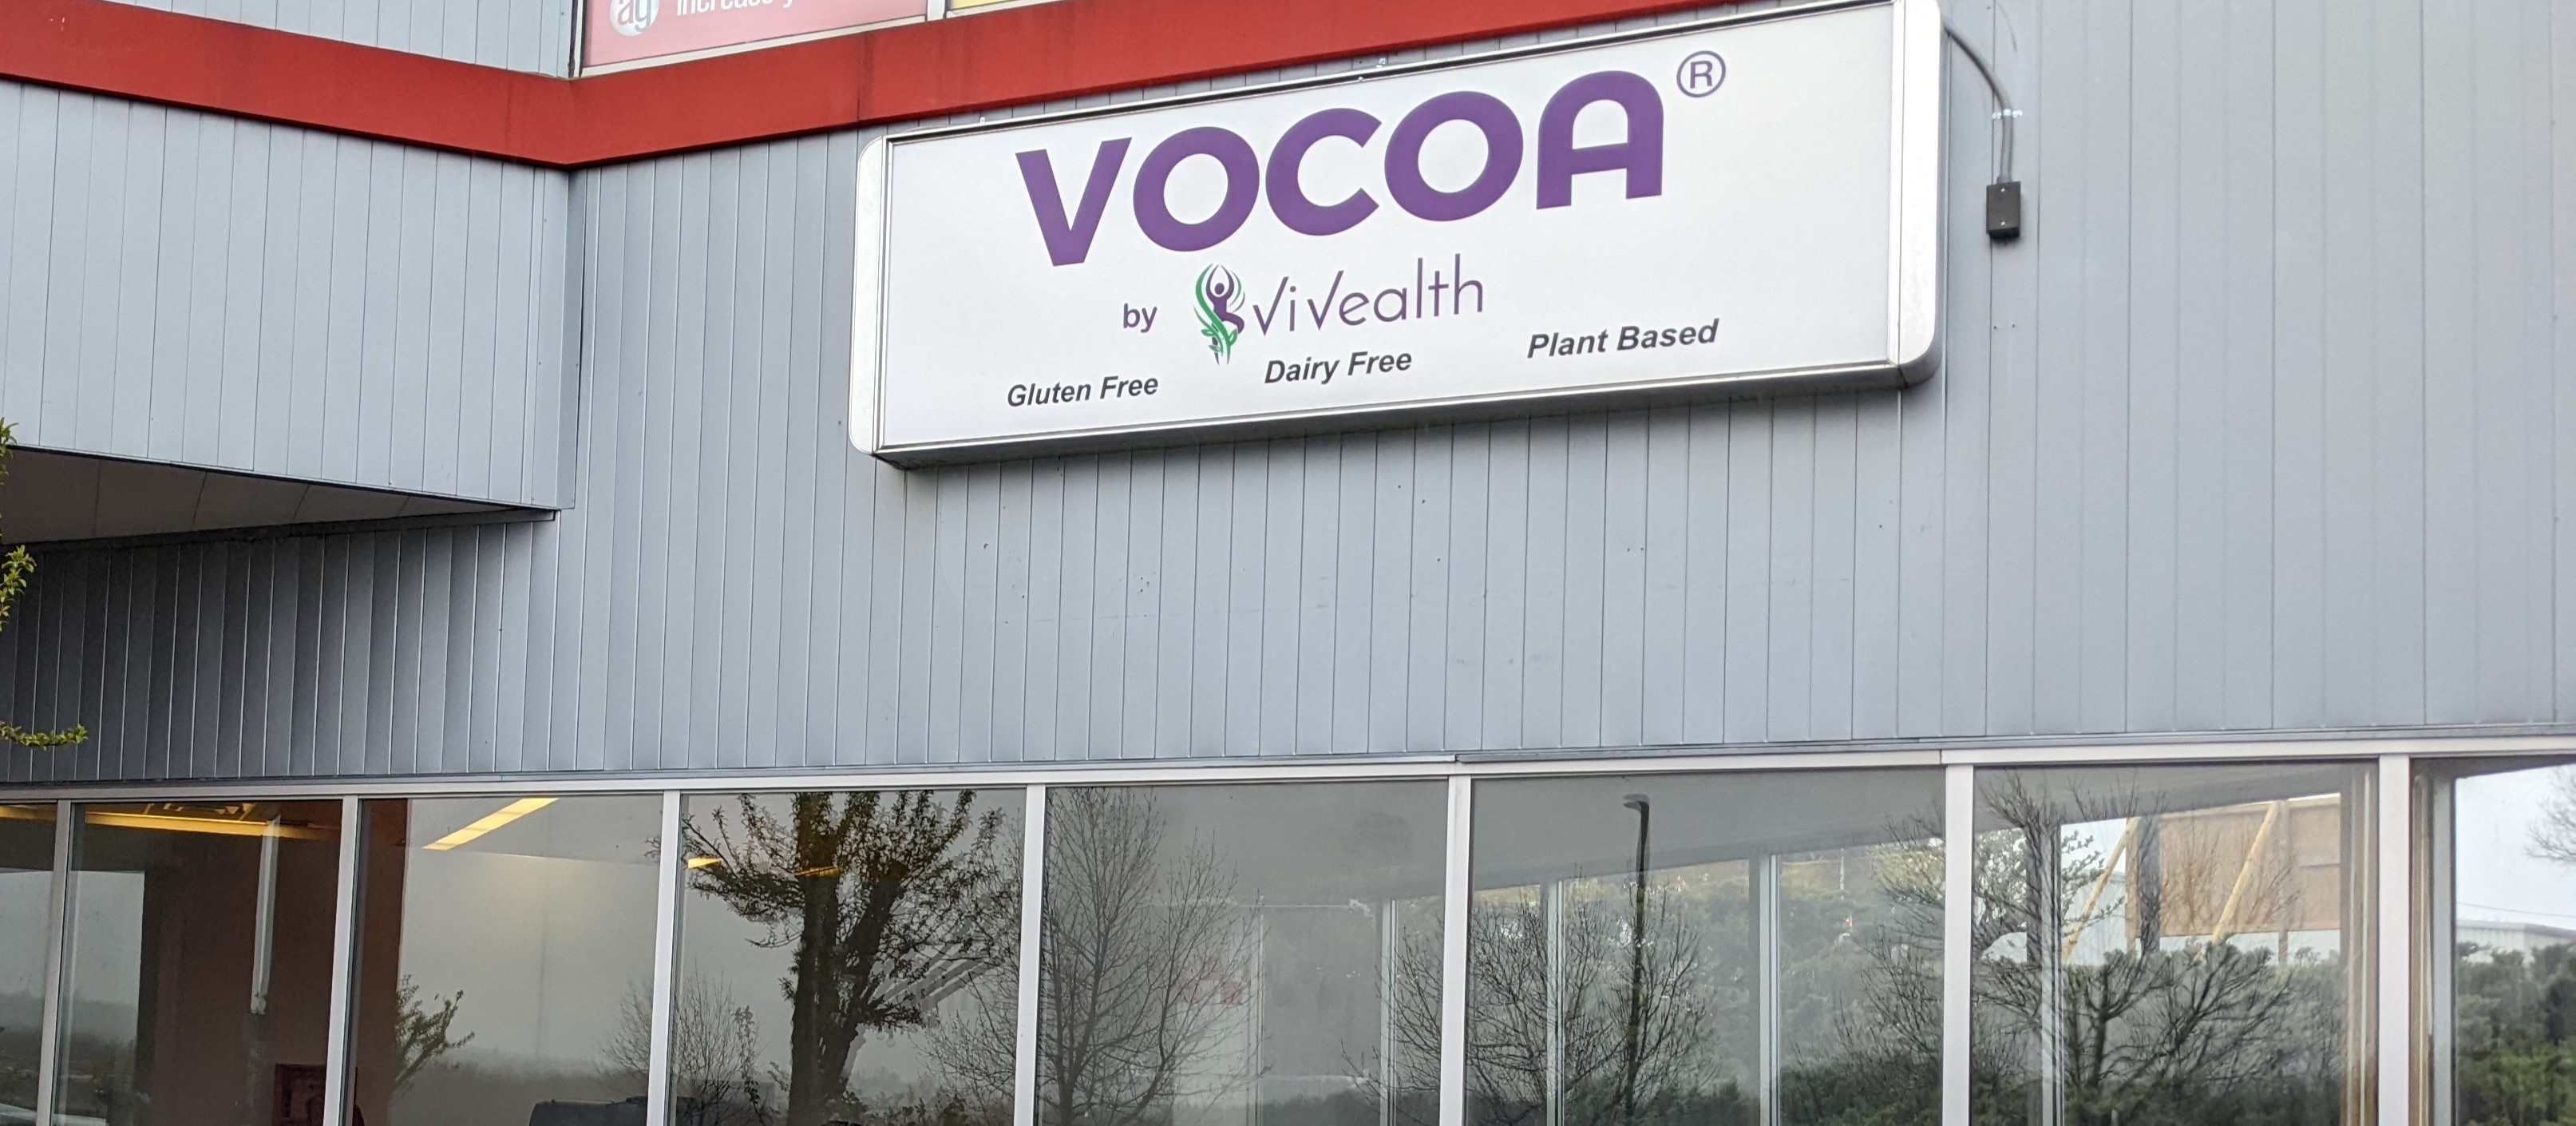 VOCOA dedicated facility in Manchester NH